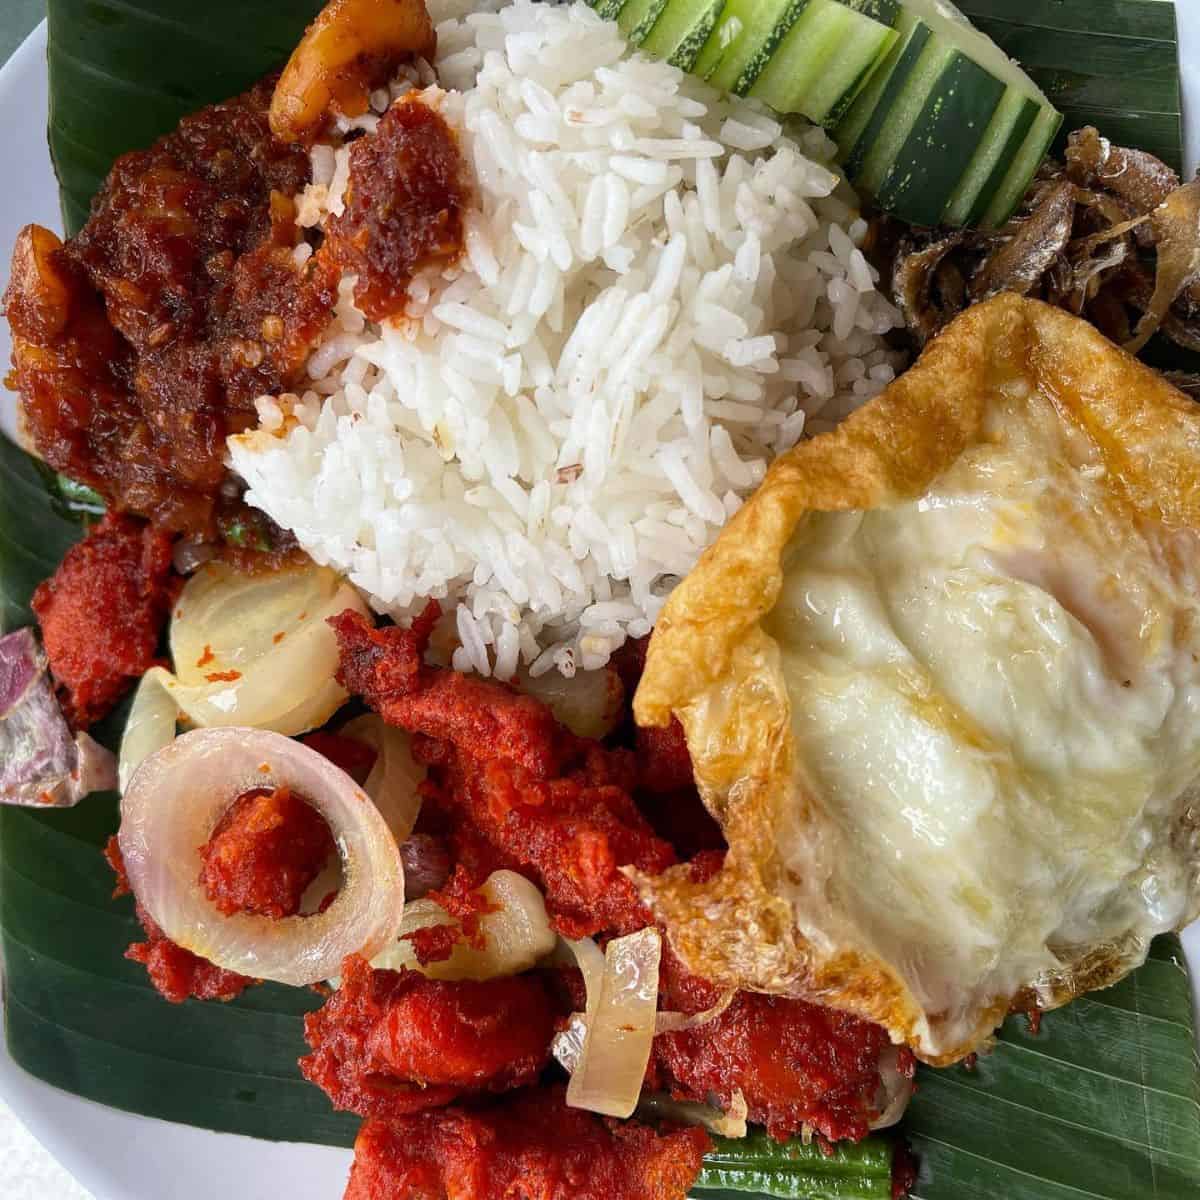 Cik Sue's flavourful plate of Malaysian big breakfast placed in a banana leaf on top of a plate